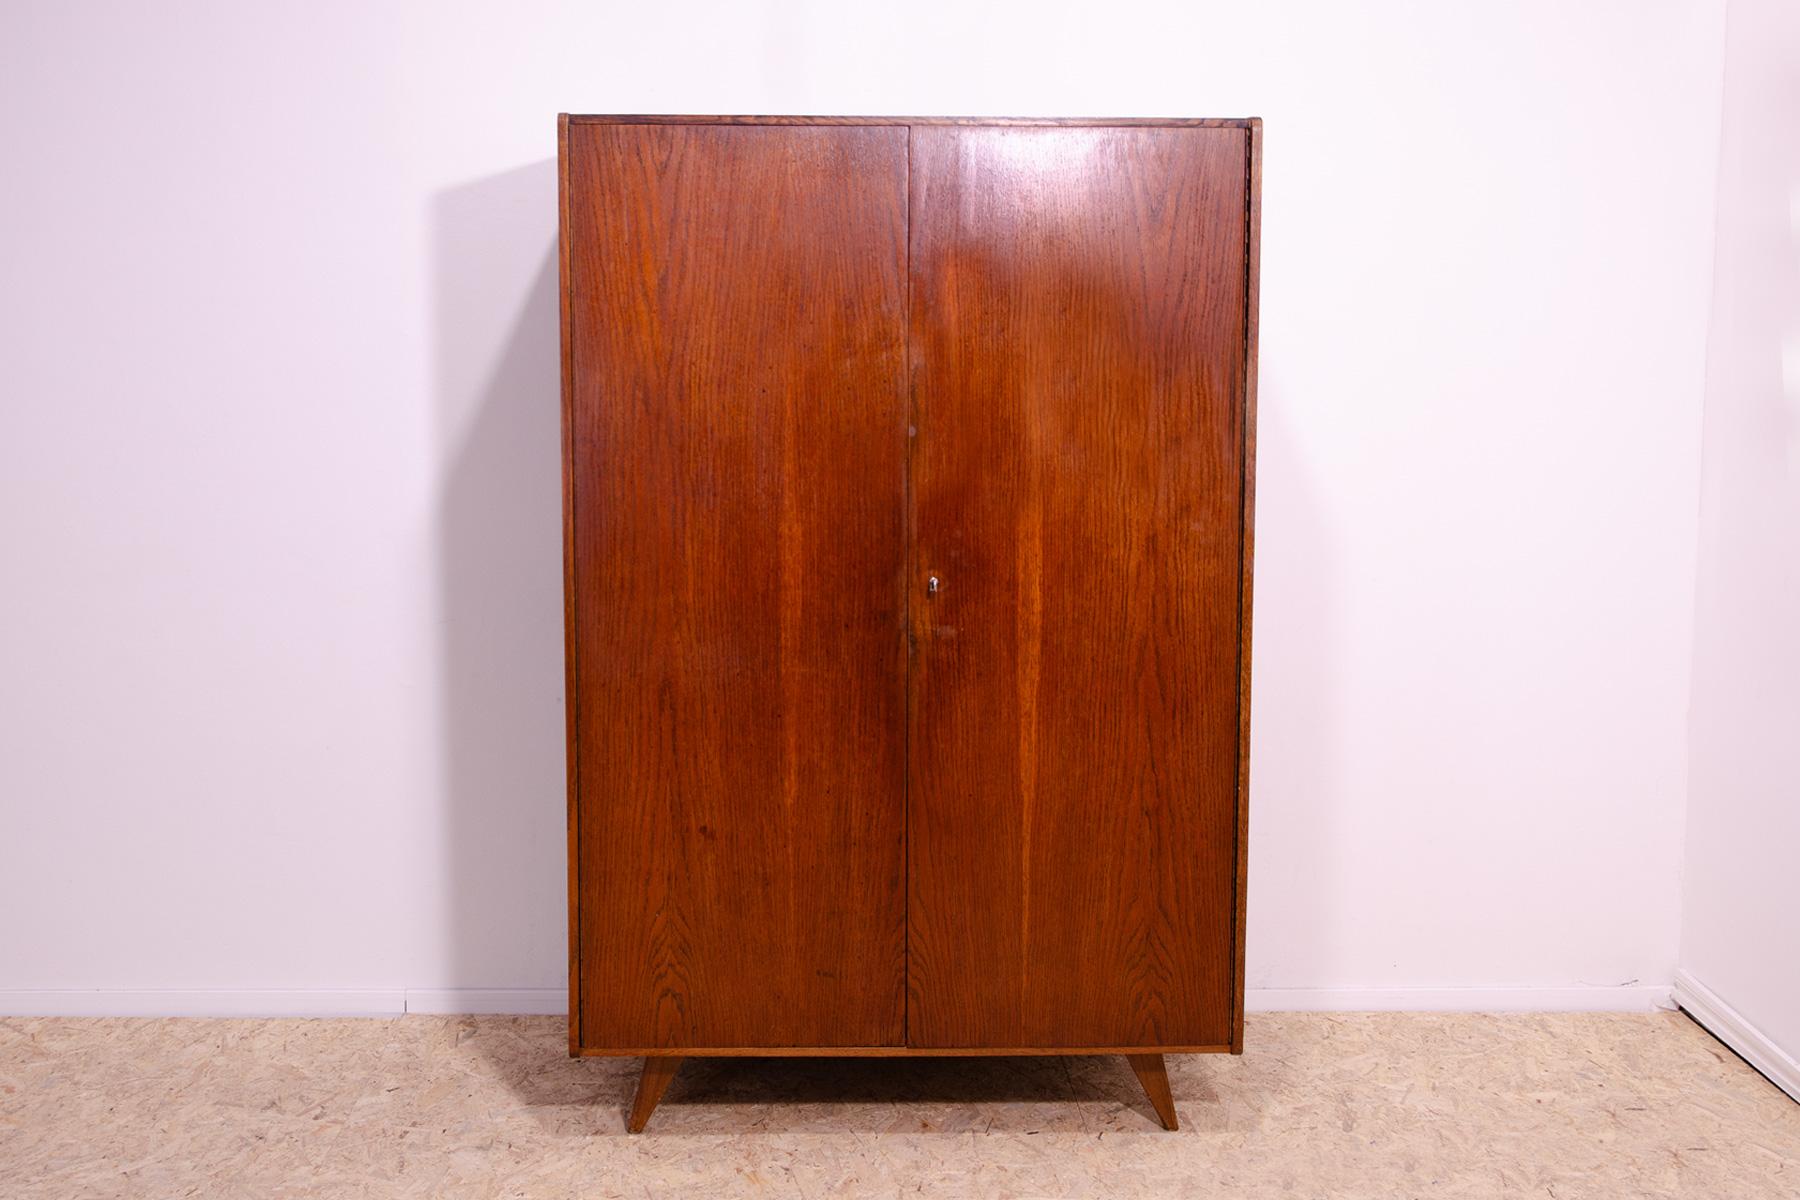 Mid century wardrobe, catalogue No. U-450, designed by Jiri Jiroutek. It´s made of beechwood, veneer, plywood.

The cabinet comes from the famous Universal series (U-450), which was designed in 1958 for the Czechoslovak national company Interiér